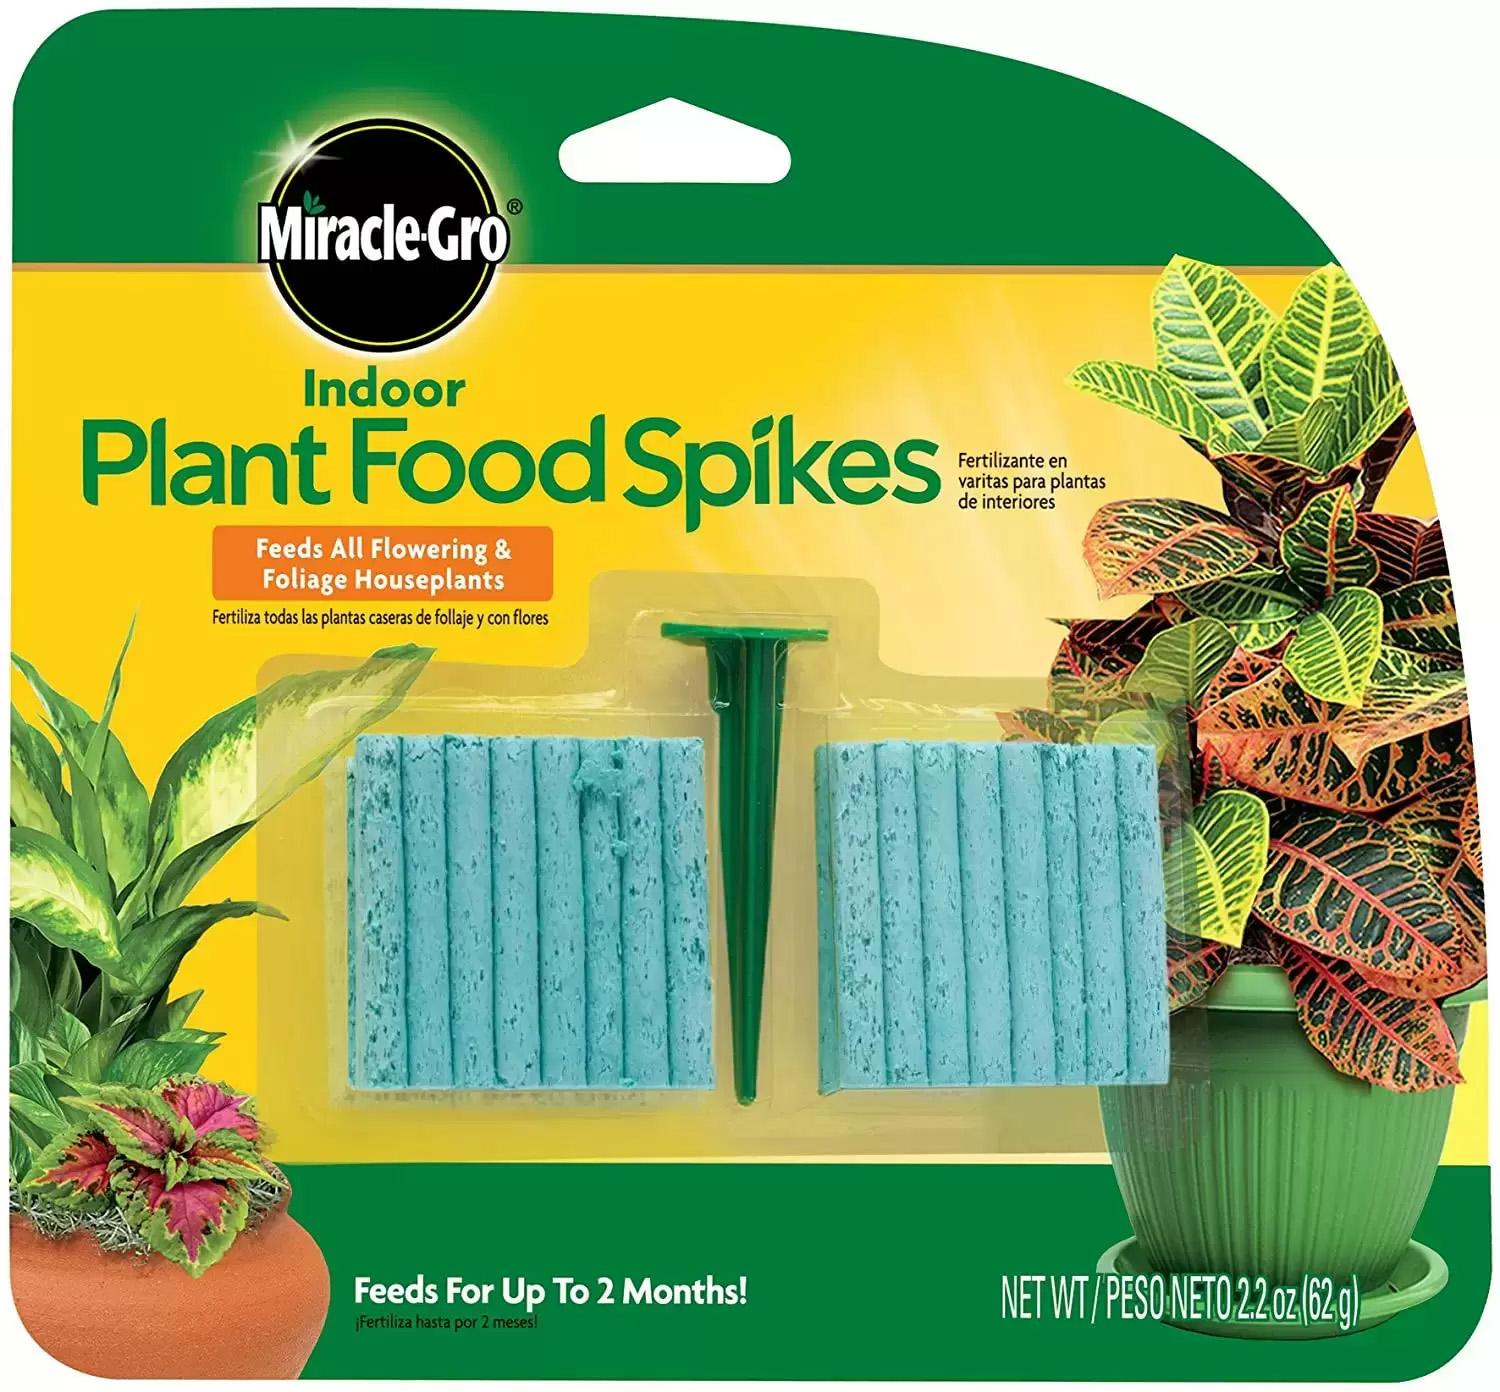 48 Miracle-Gro Indoor Plant Food Spikes for $2.13 Shipped